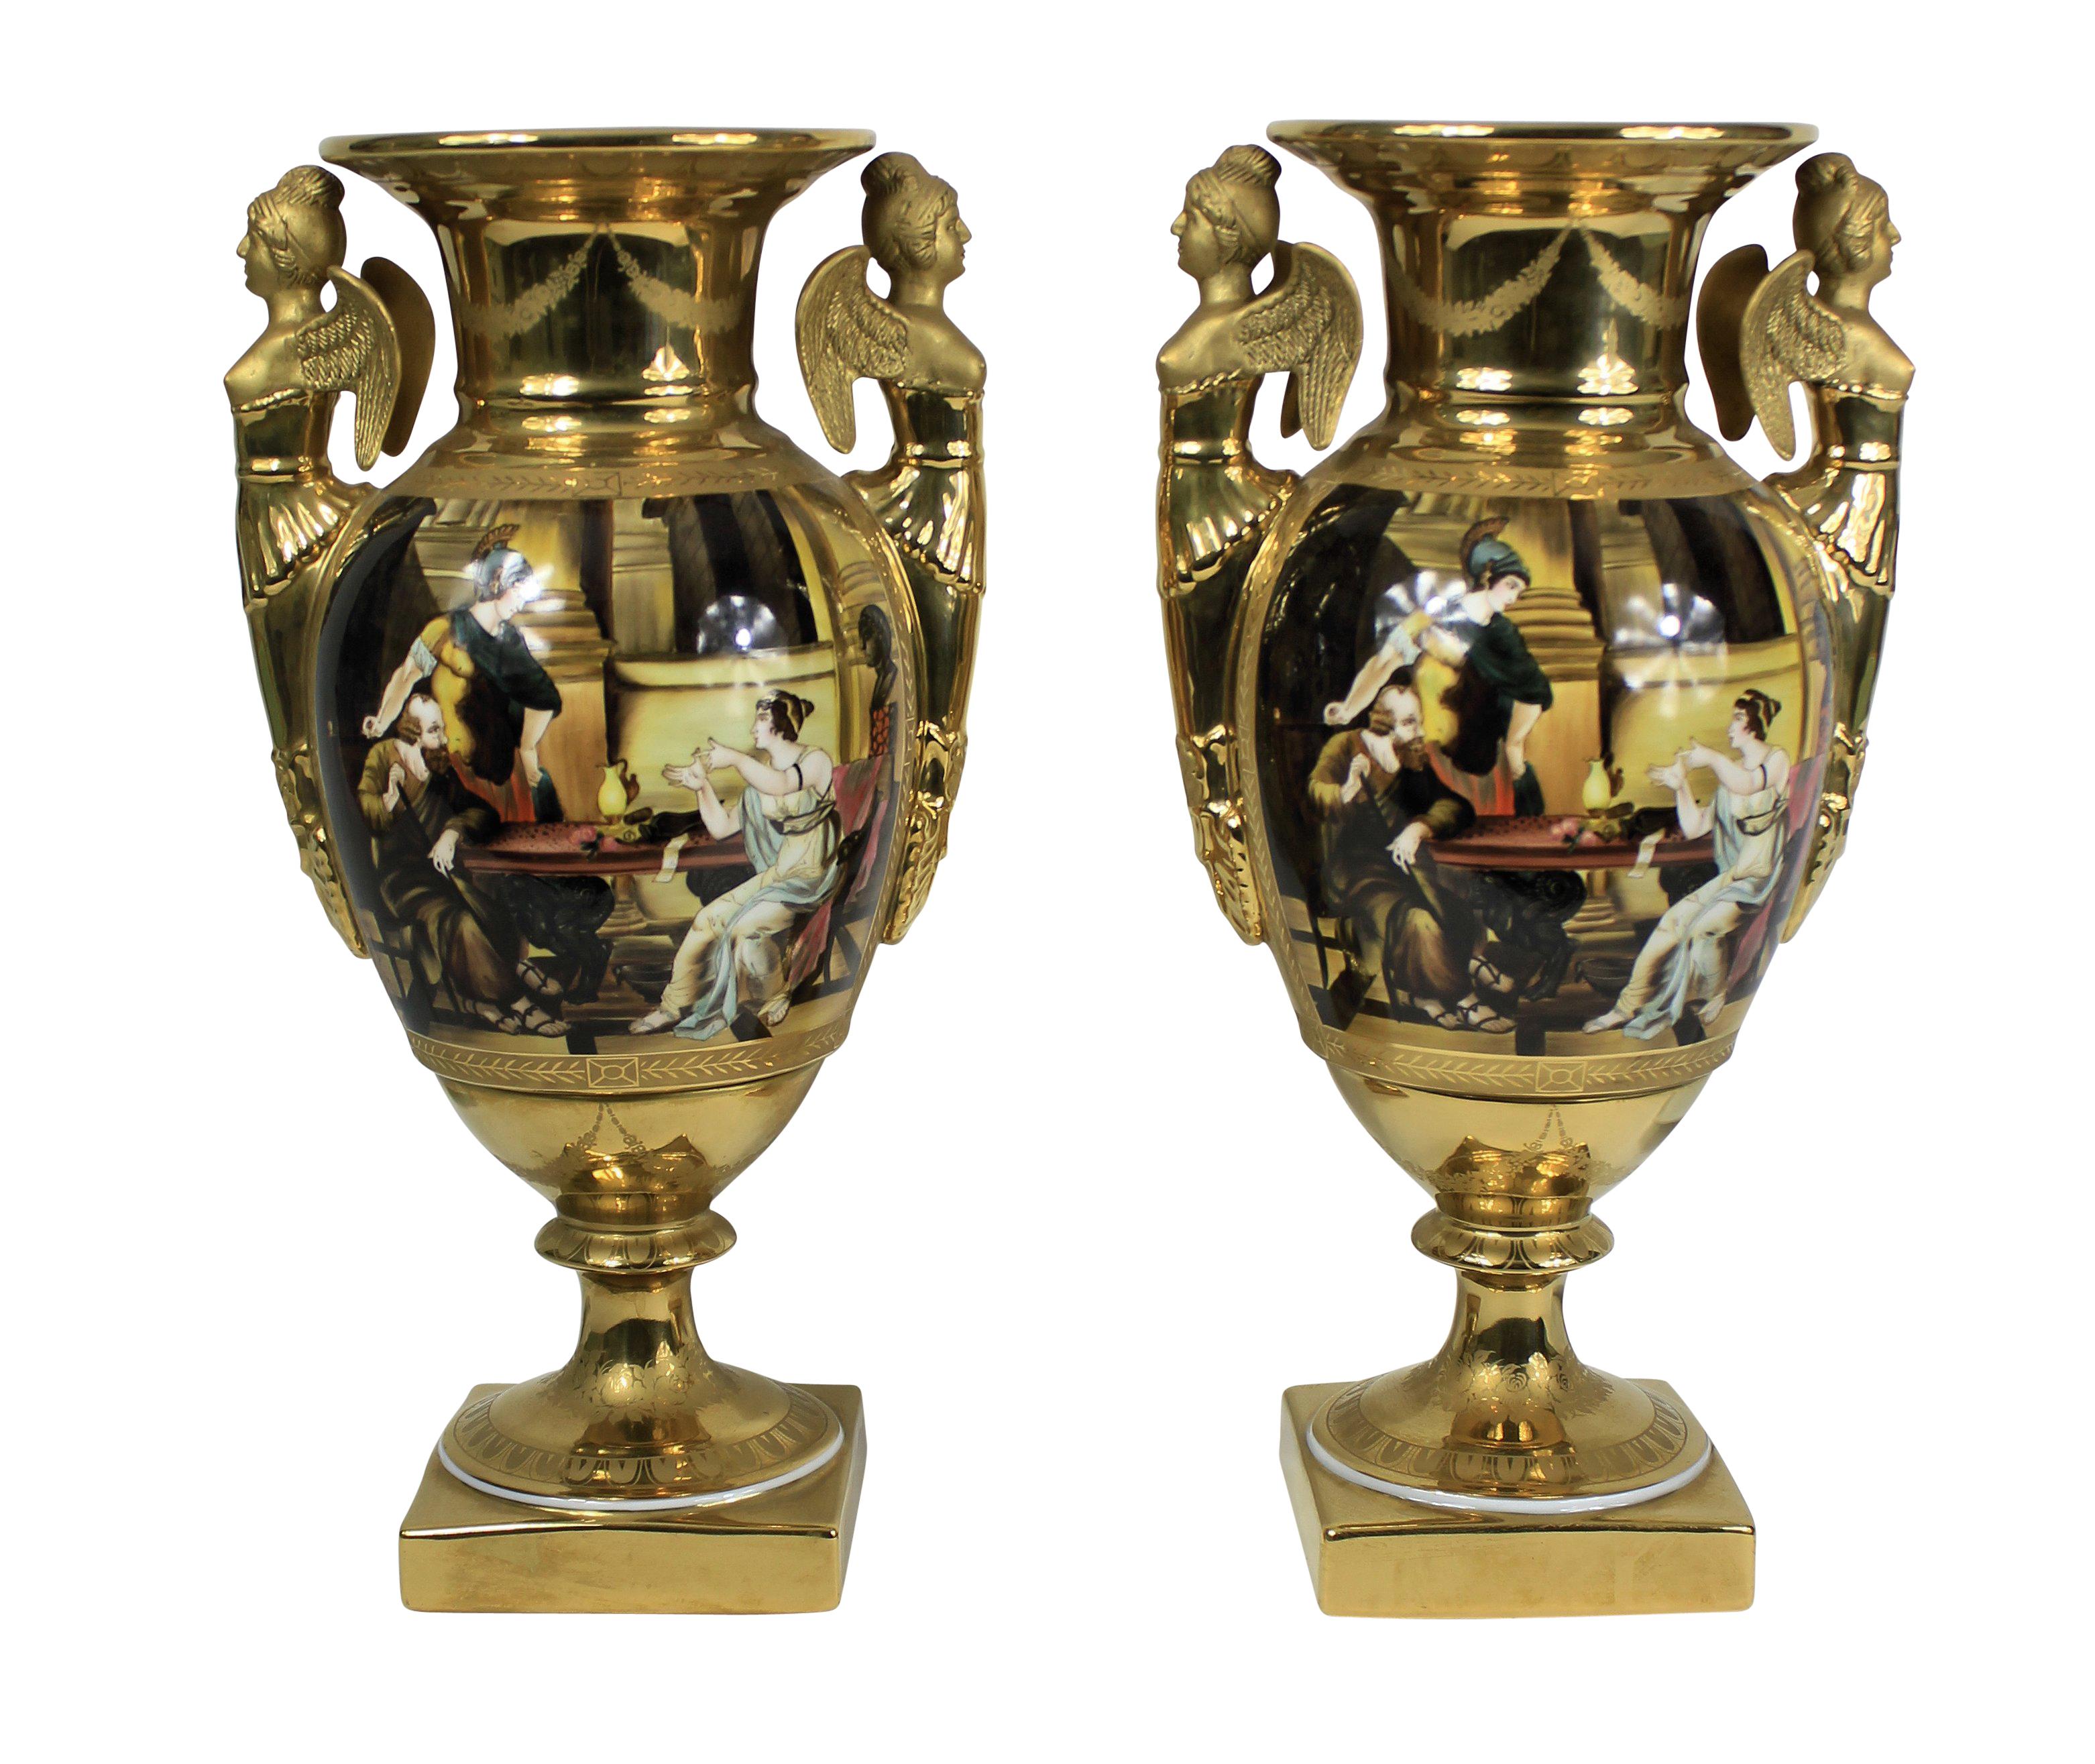 A pair of French hand painted ground gold porcelain vases, depicting Classical scenes, with an armorial crest and crown.